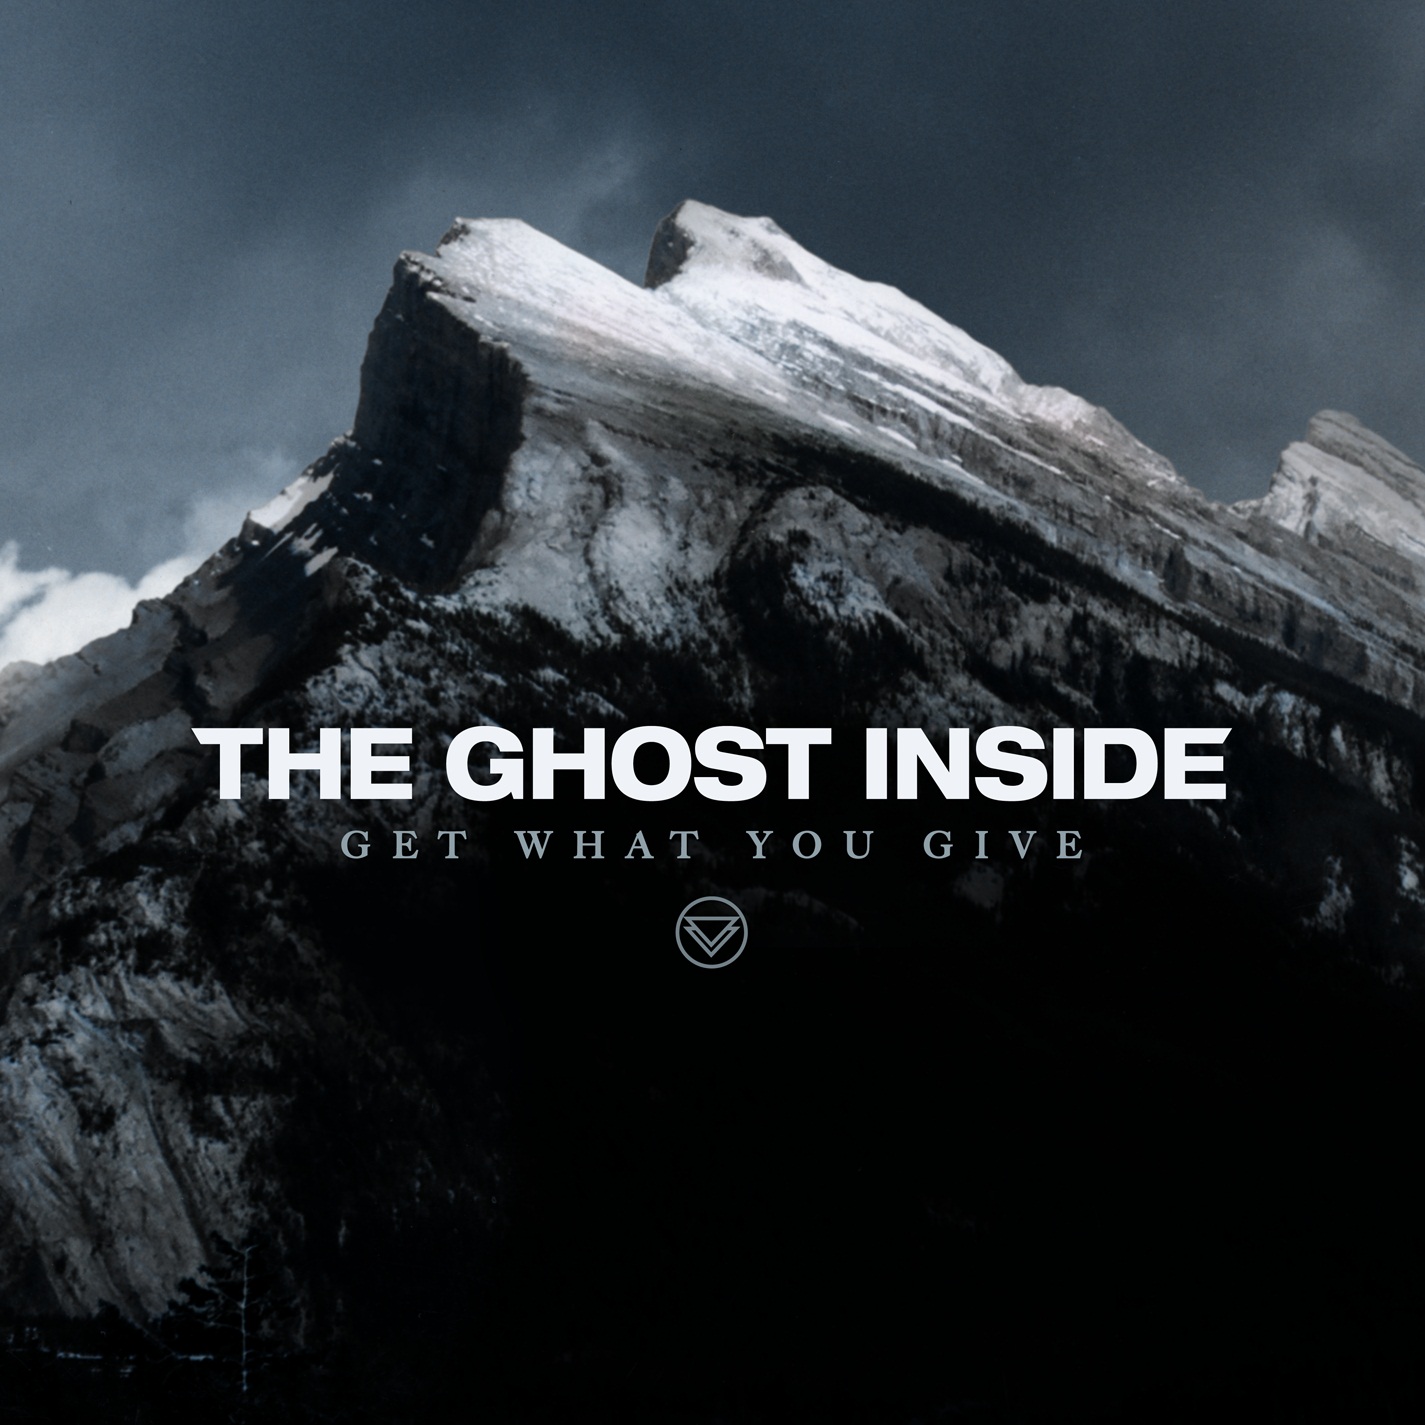 The Ghost Inside stream new record